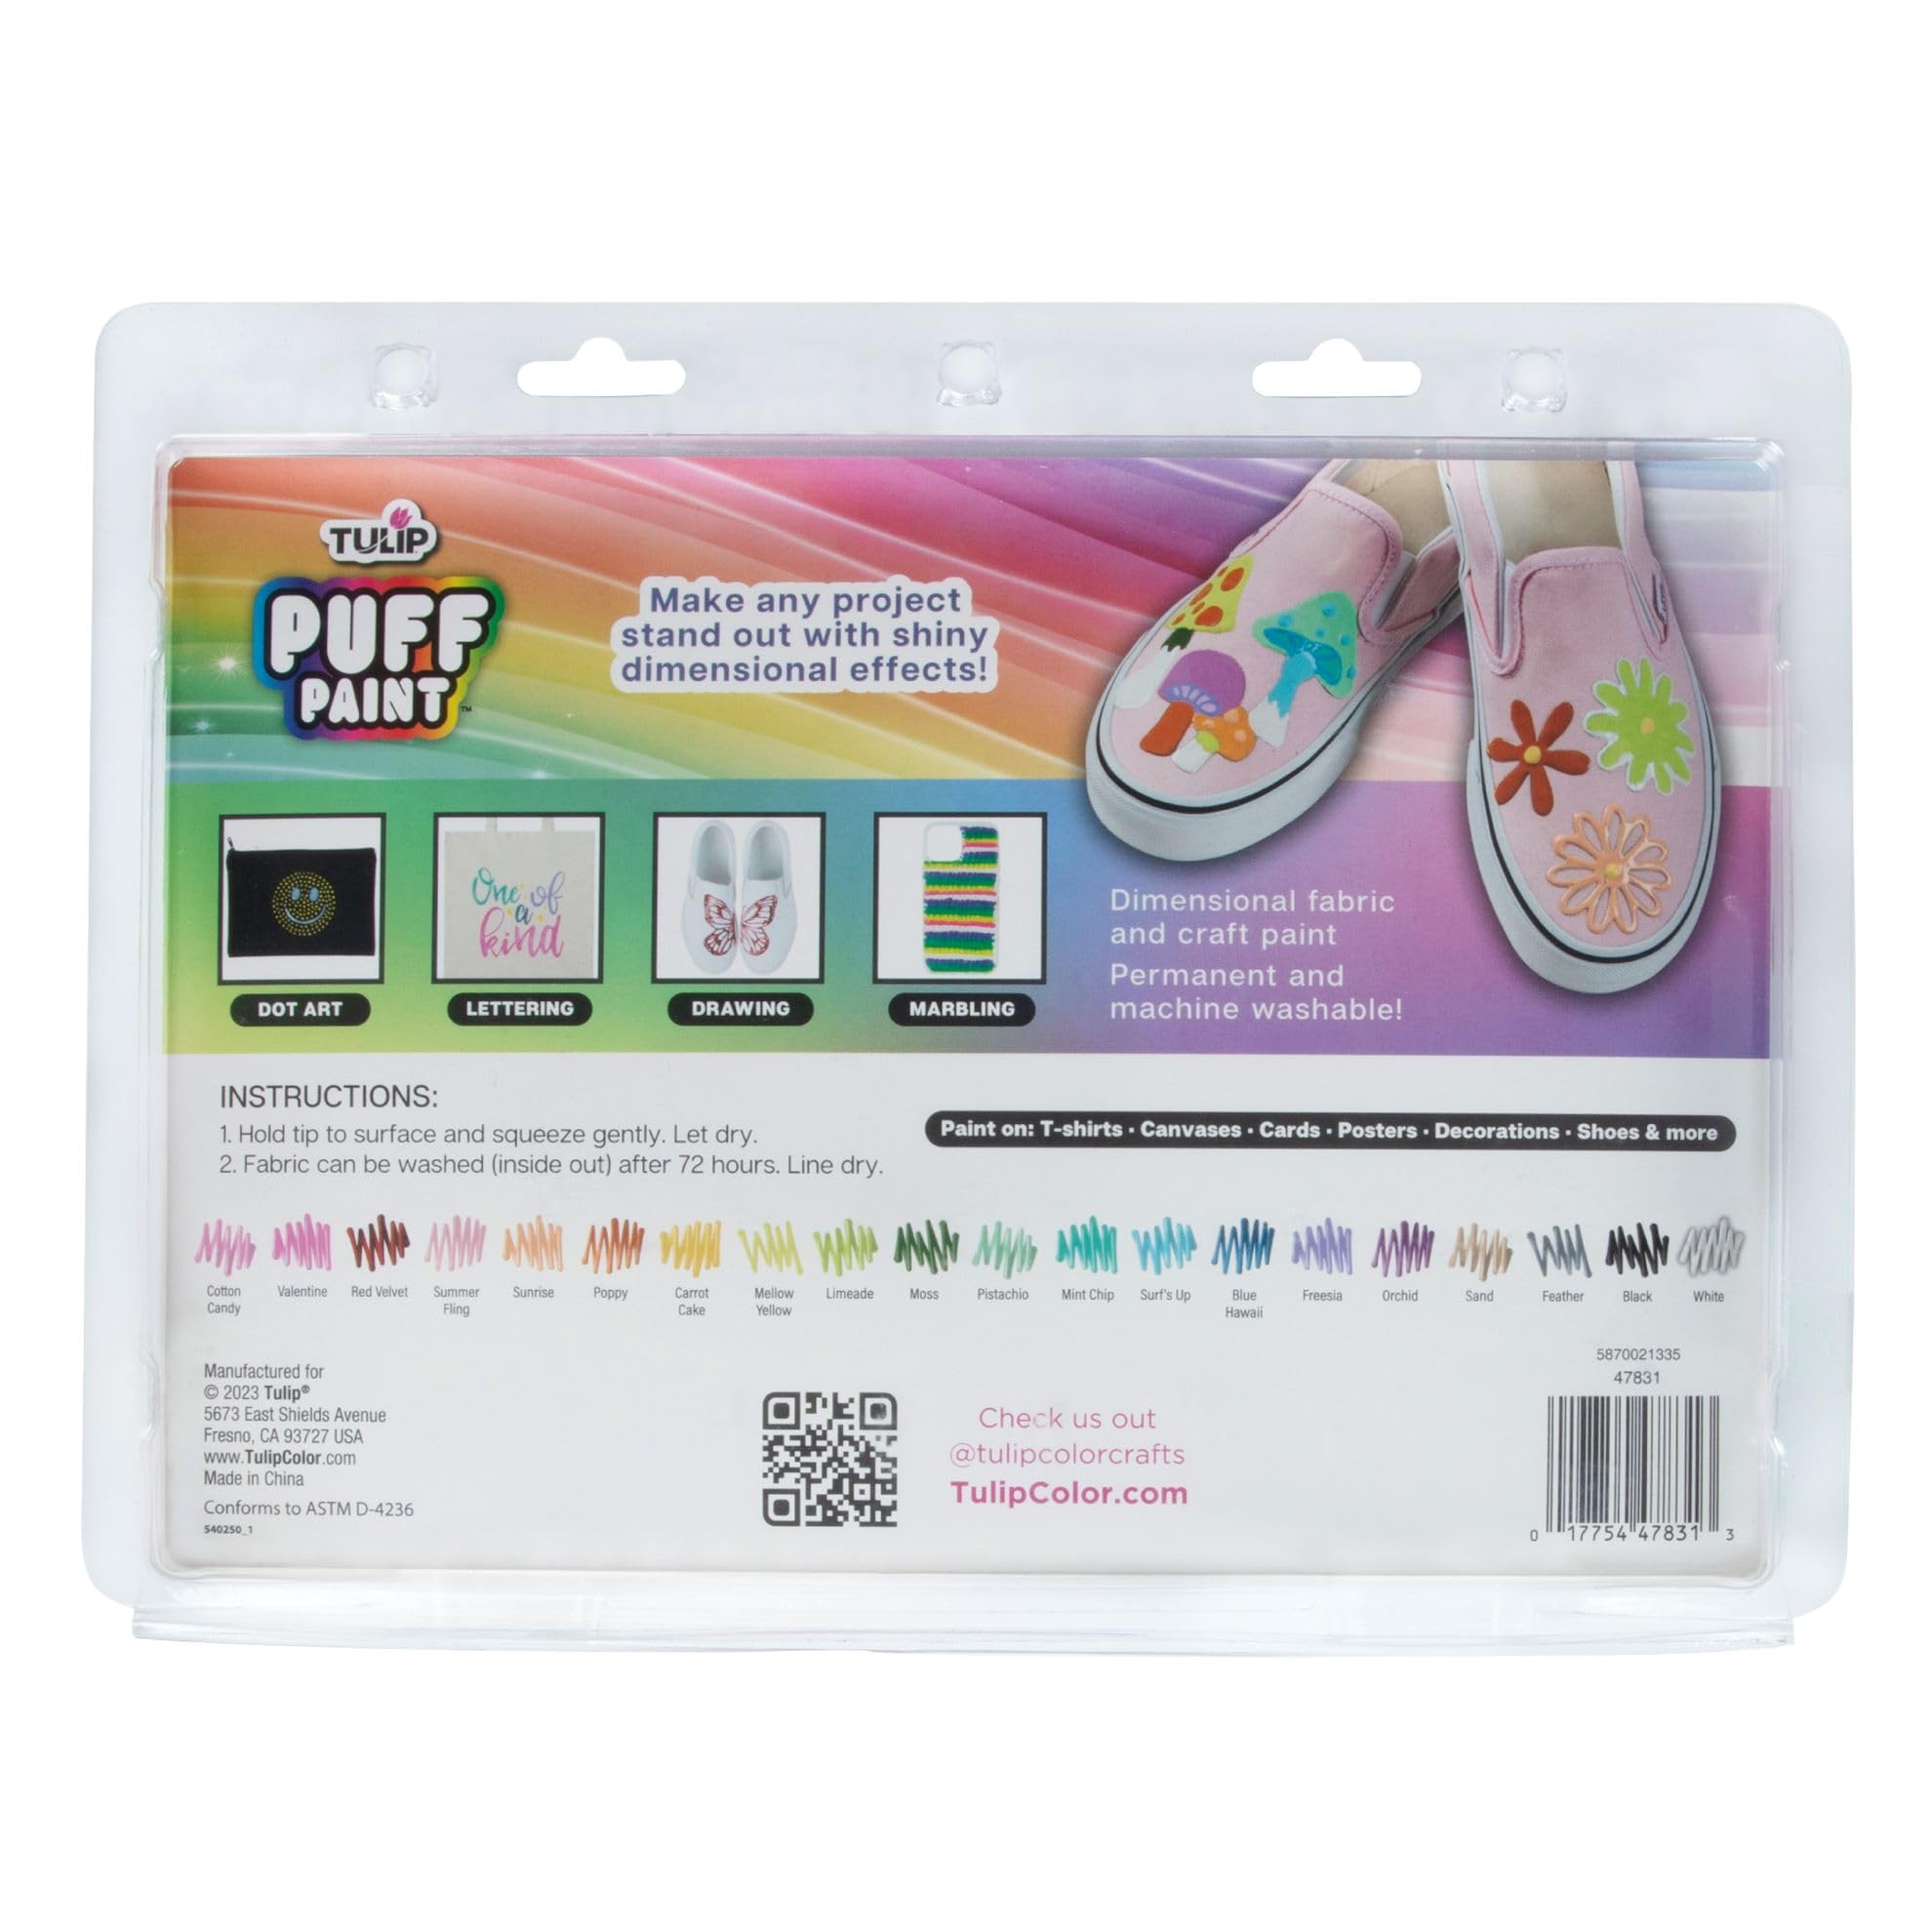 TULIP Puff Paint 20 Pack, Mellow Rainbow, Dimesnional Fabric Paint Party Pack